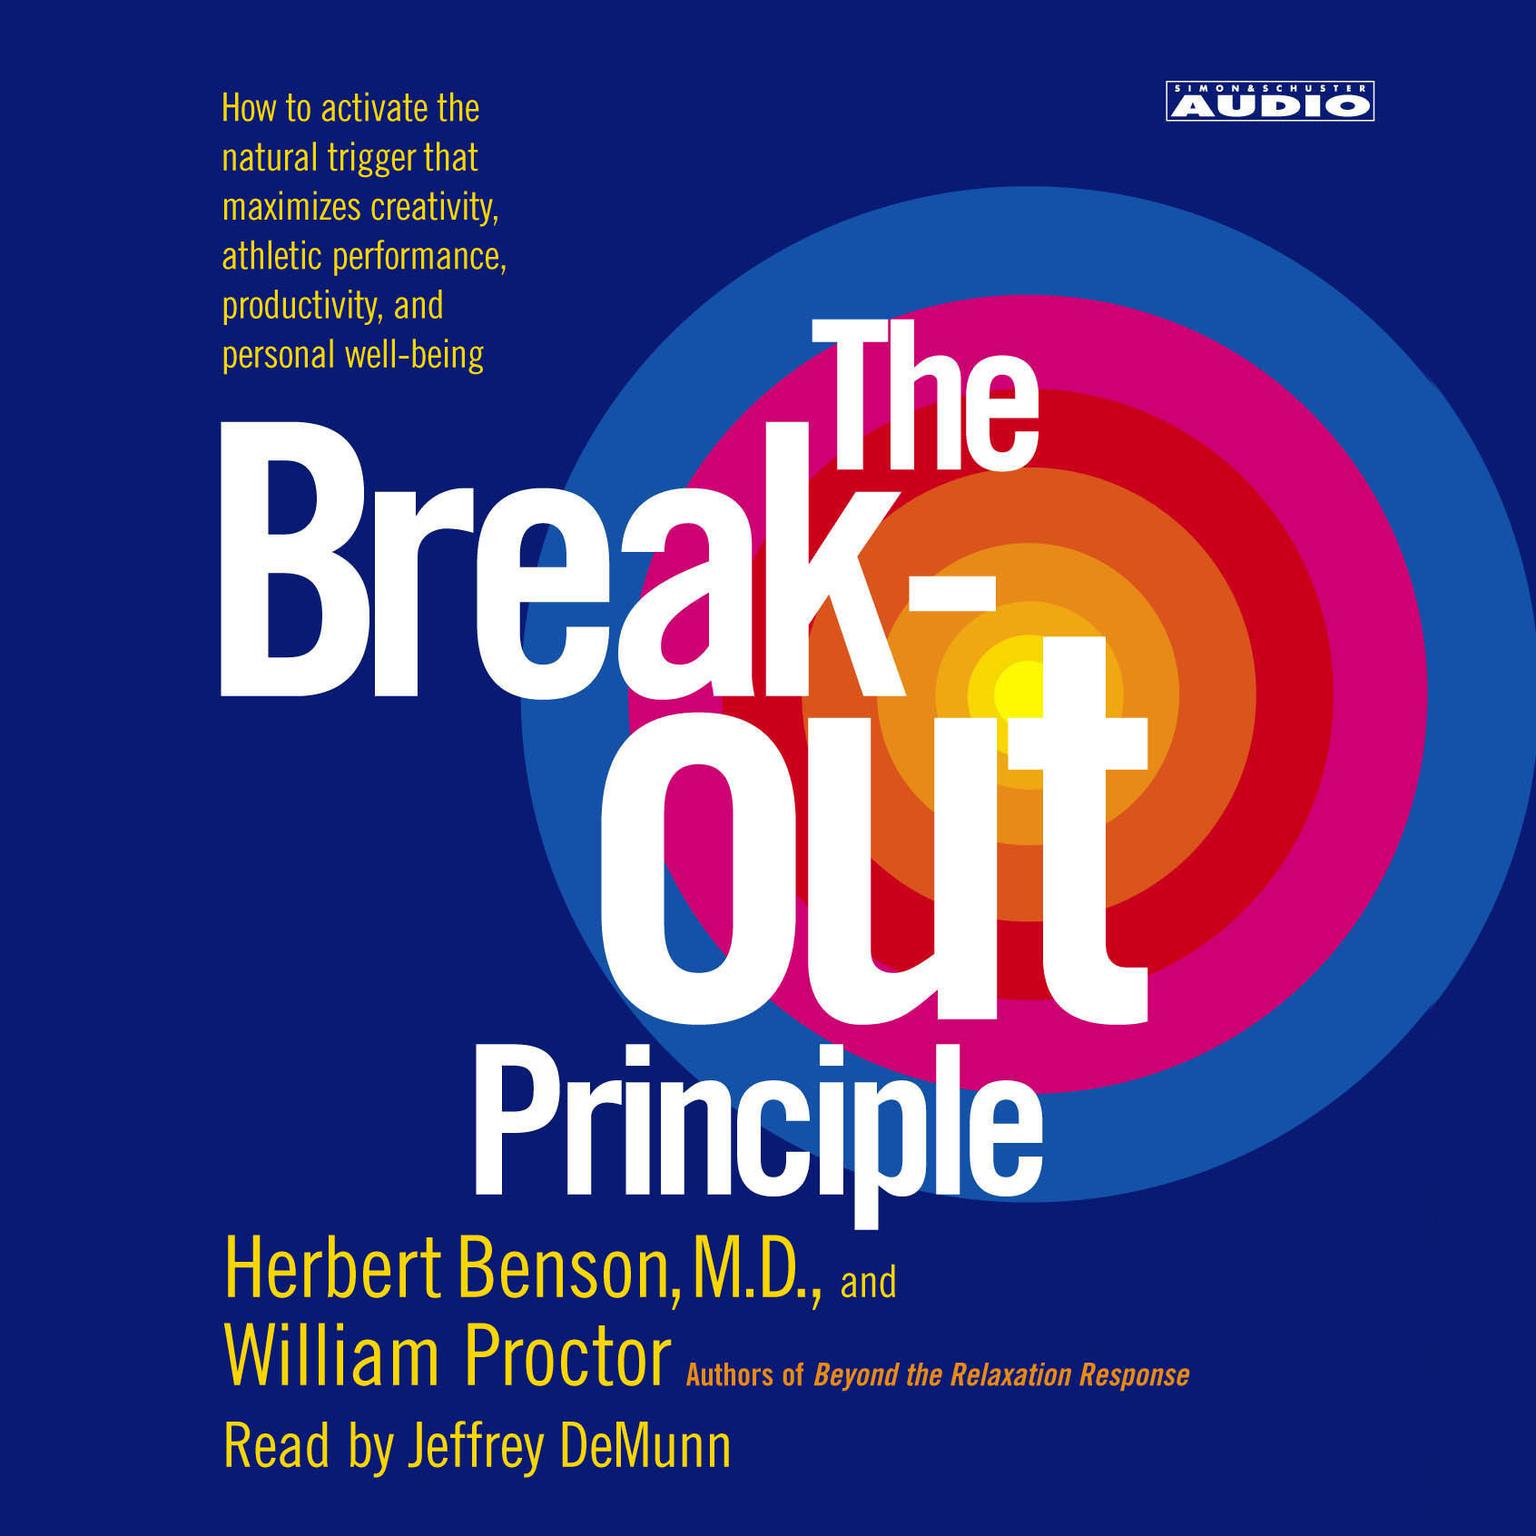 The Breakout Principle (Abridged): How to Activate the Natural Trigger That Maximizes Creativity, Athletic Performance, Productivity and Personal Well-Being Audiobook, by Herbert Benson